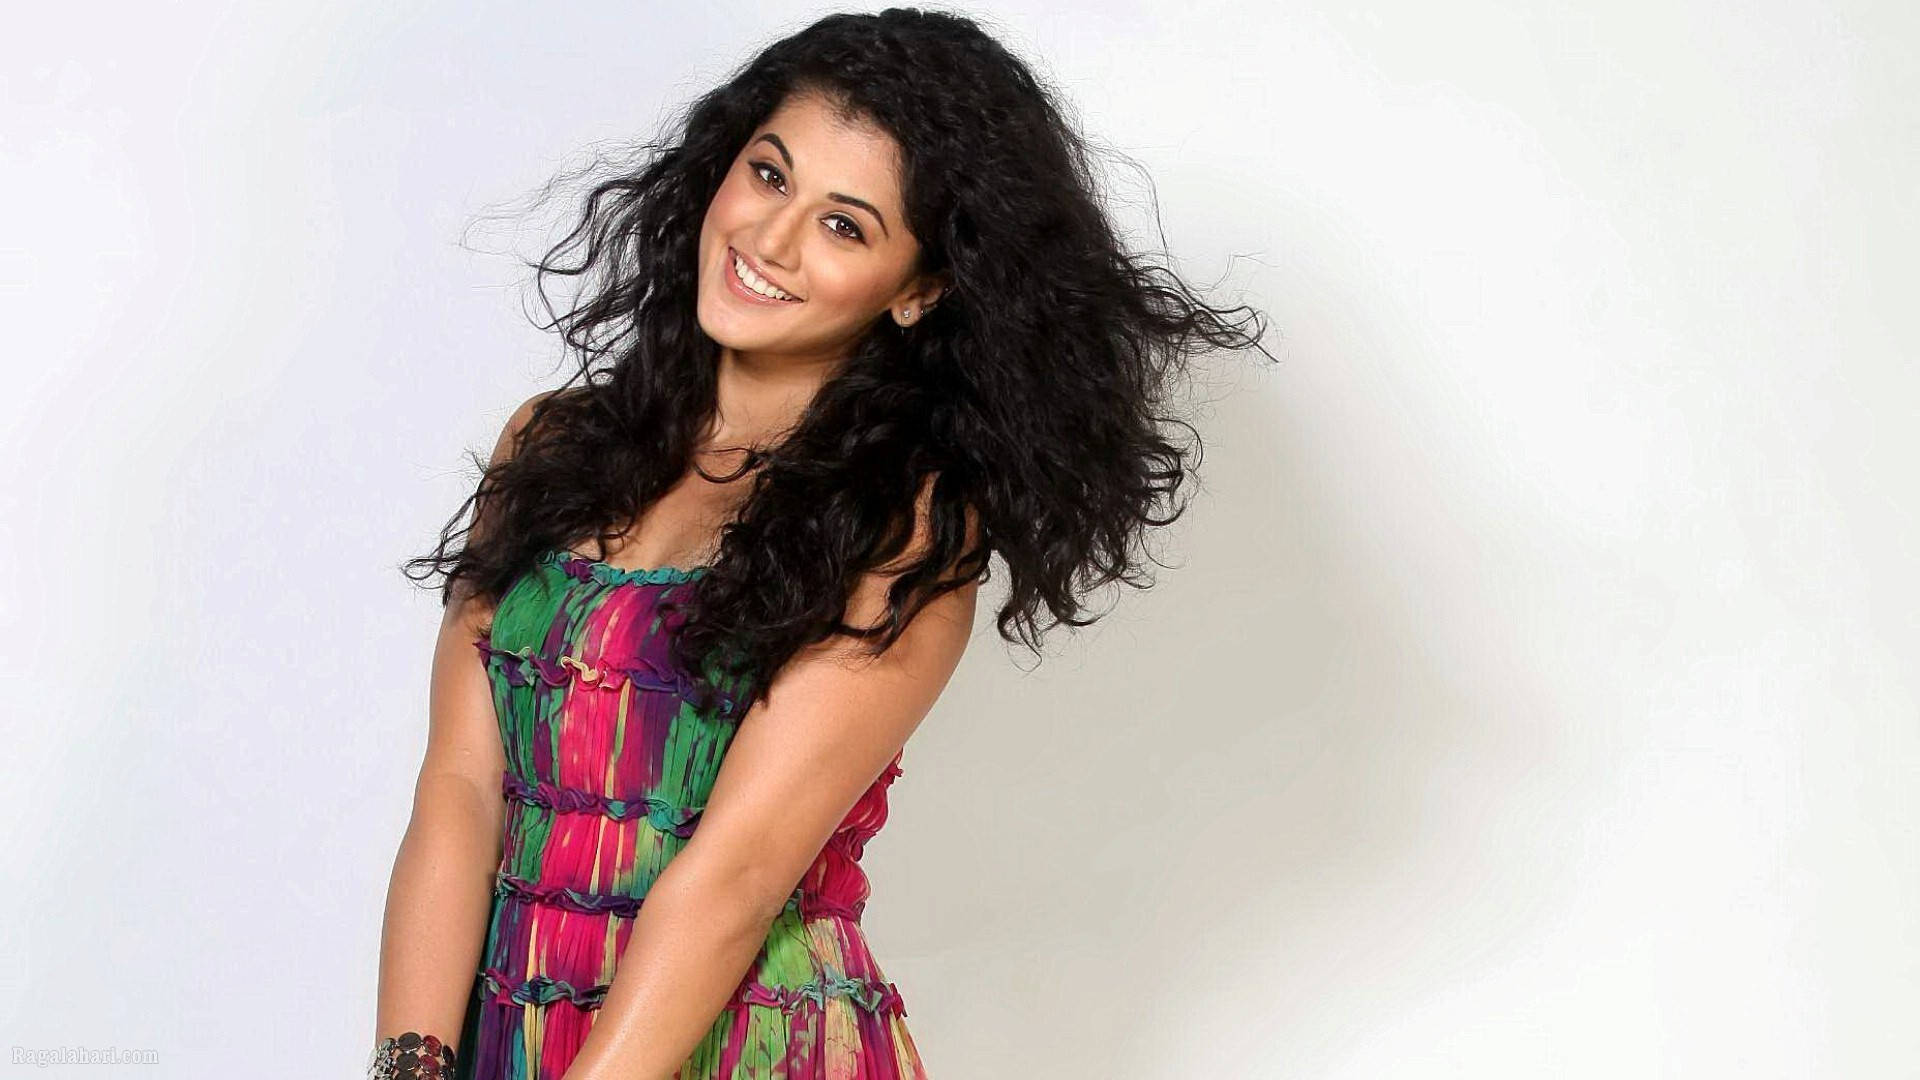 Adorable Taapsee Pannu Background